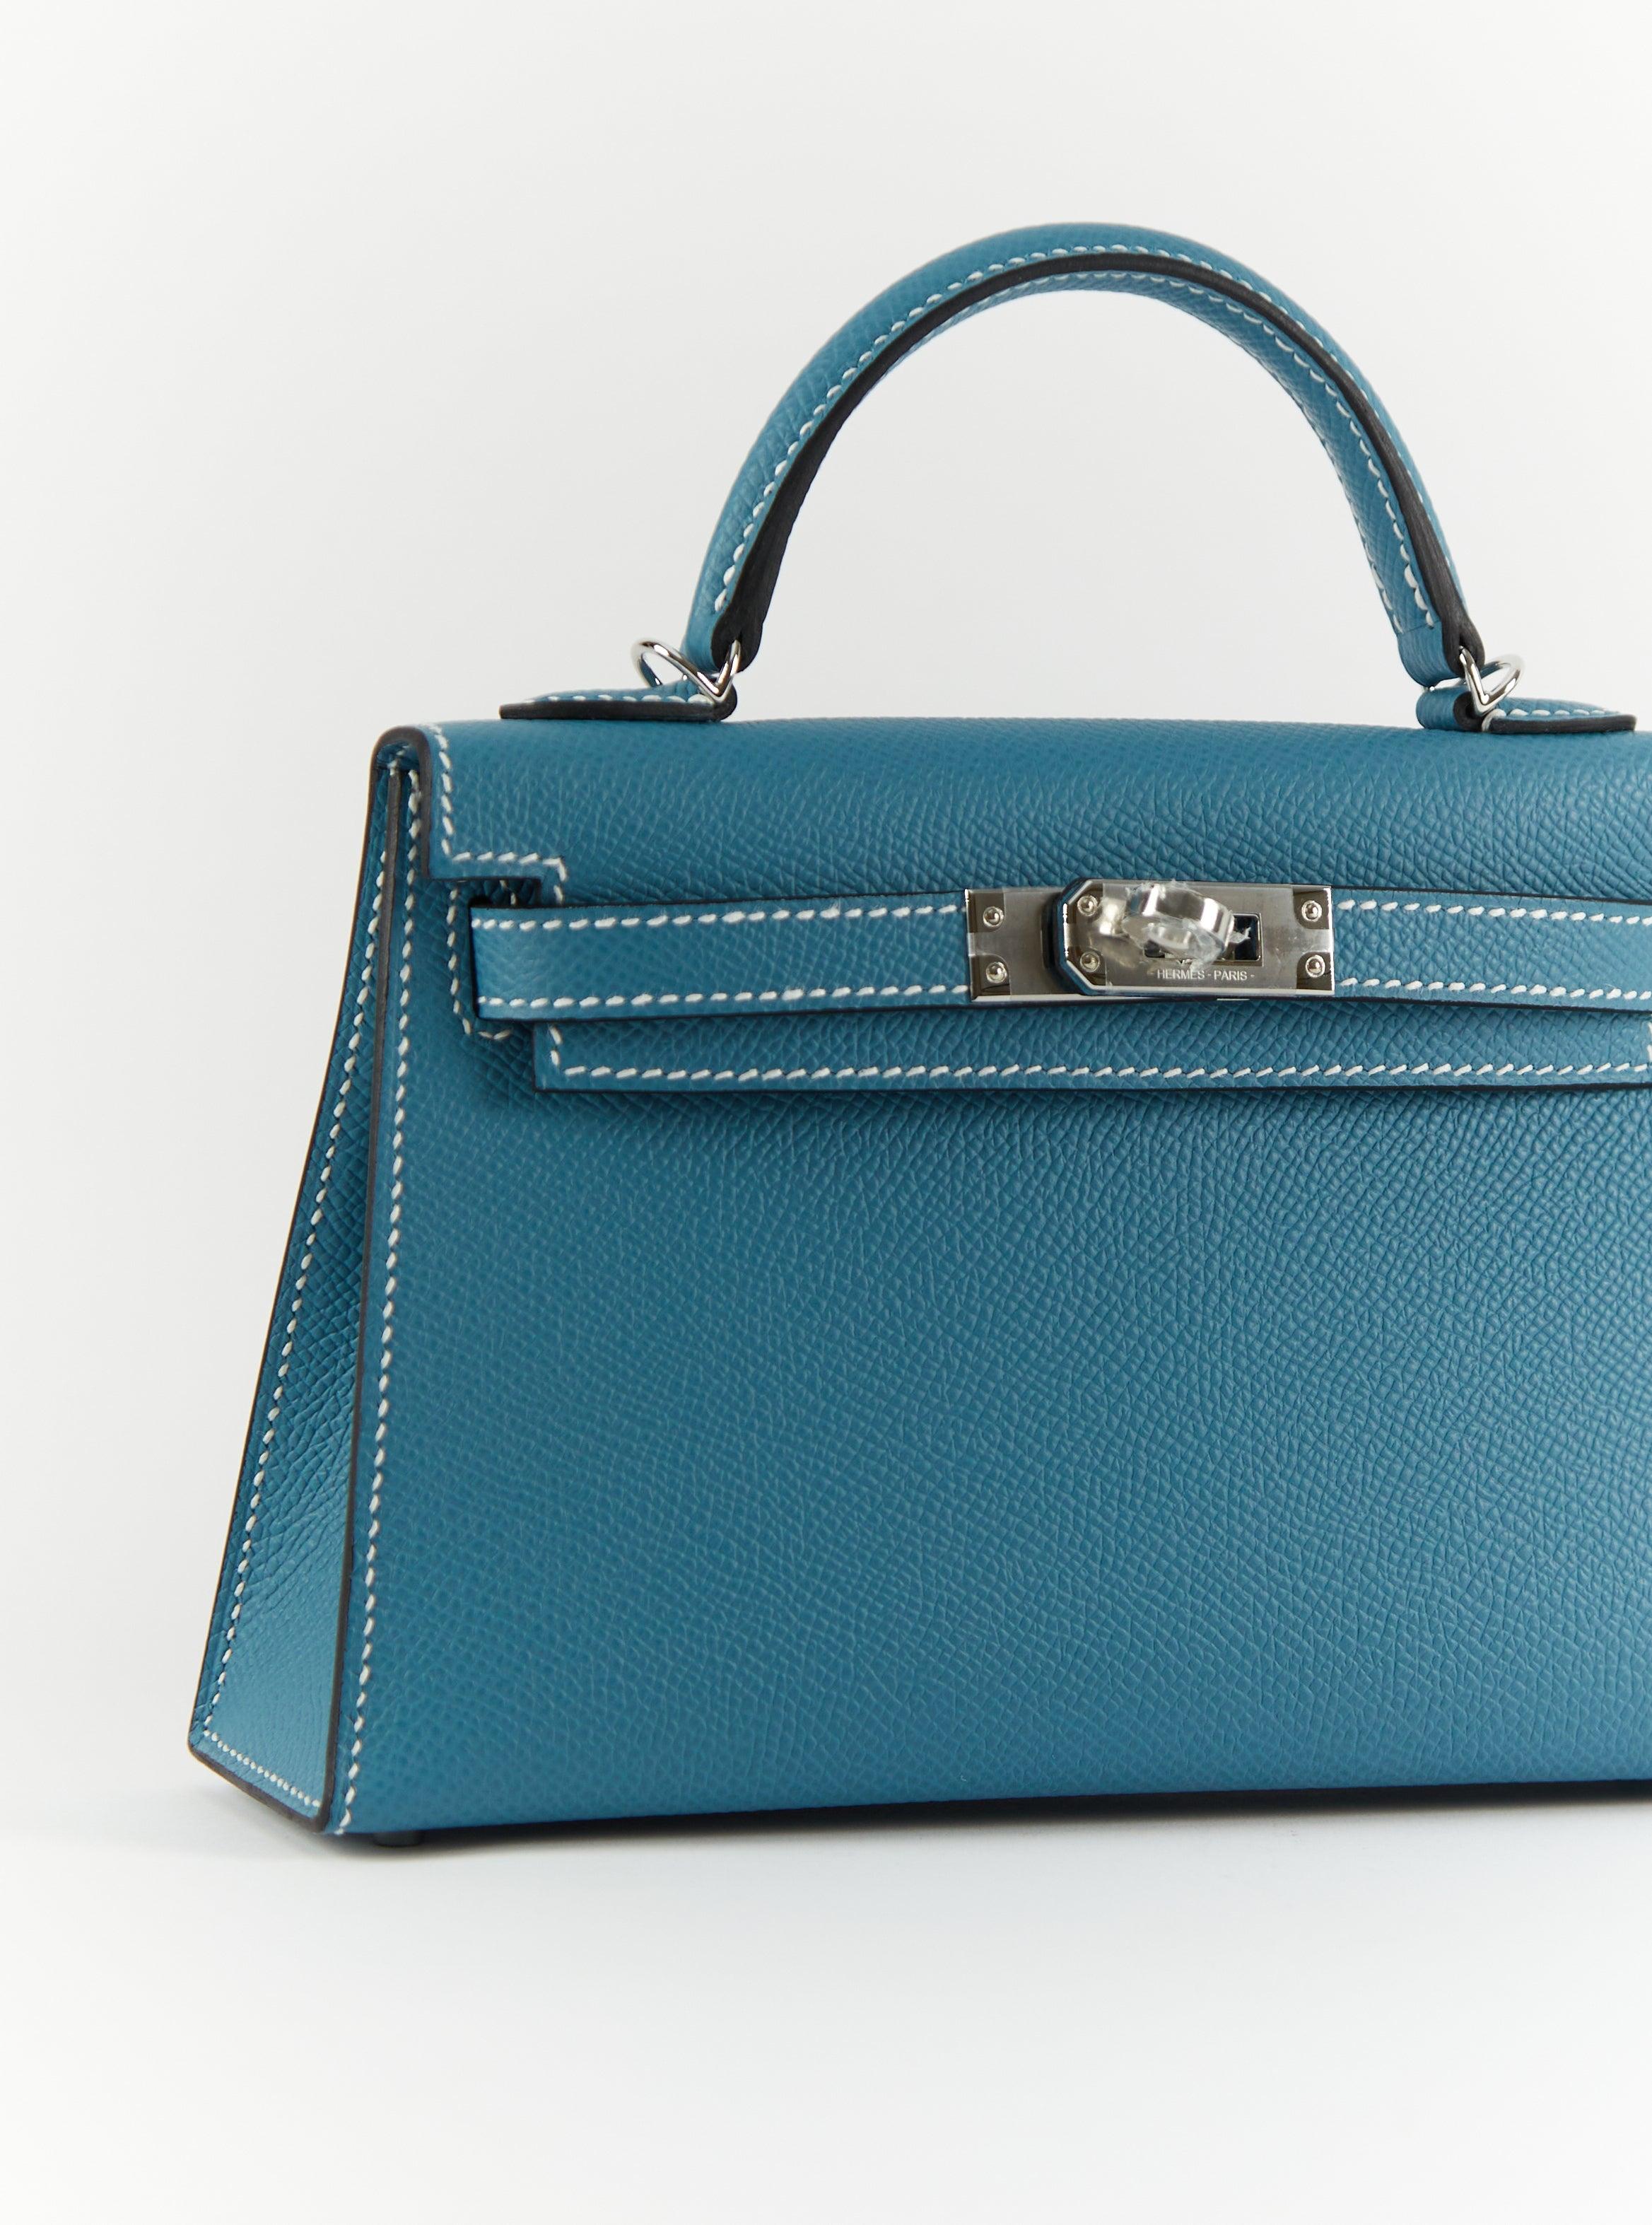 HERMÈS MINI KELLY II 20CM BLUE JEAN Epsom Leather with Palladium Hardware In Excellent Condition For Sale In London, GB